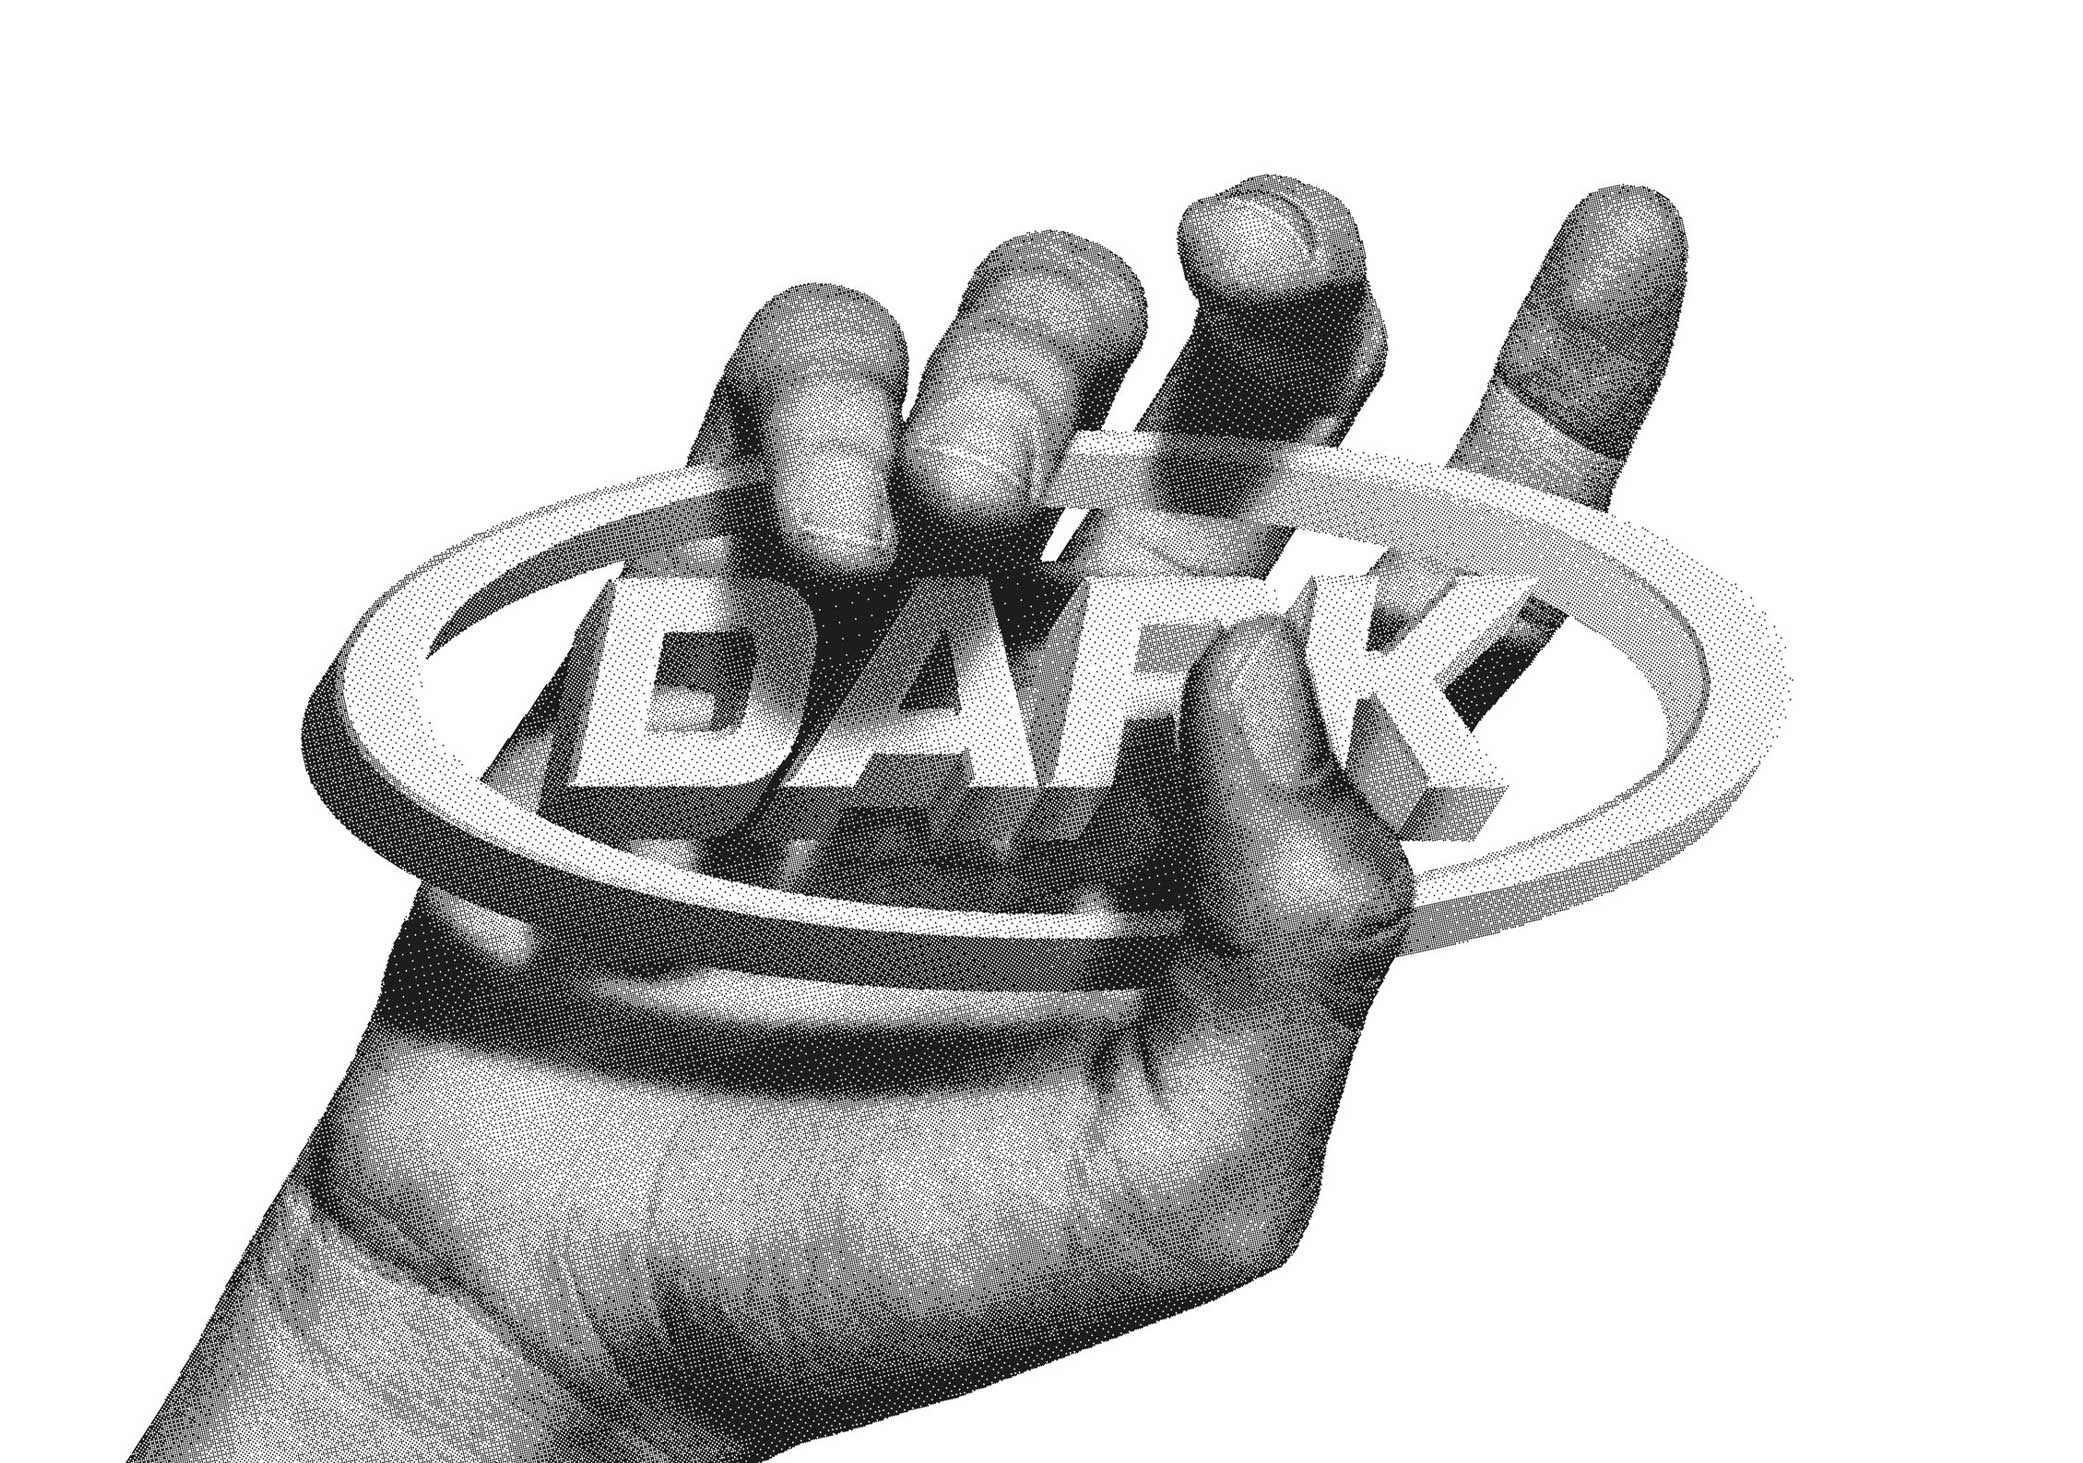 Stylised image of a hand holding a logo with a noisy monochromatic effect